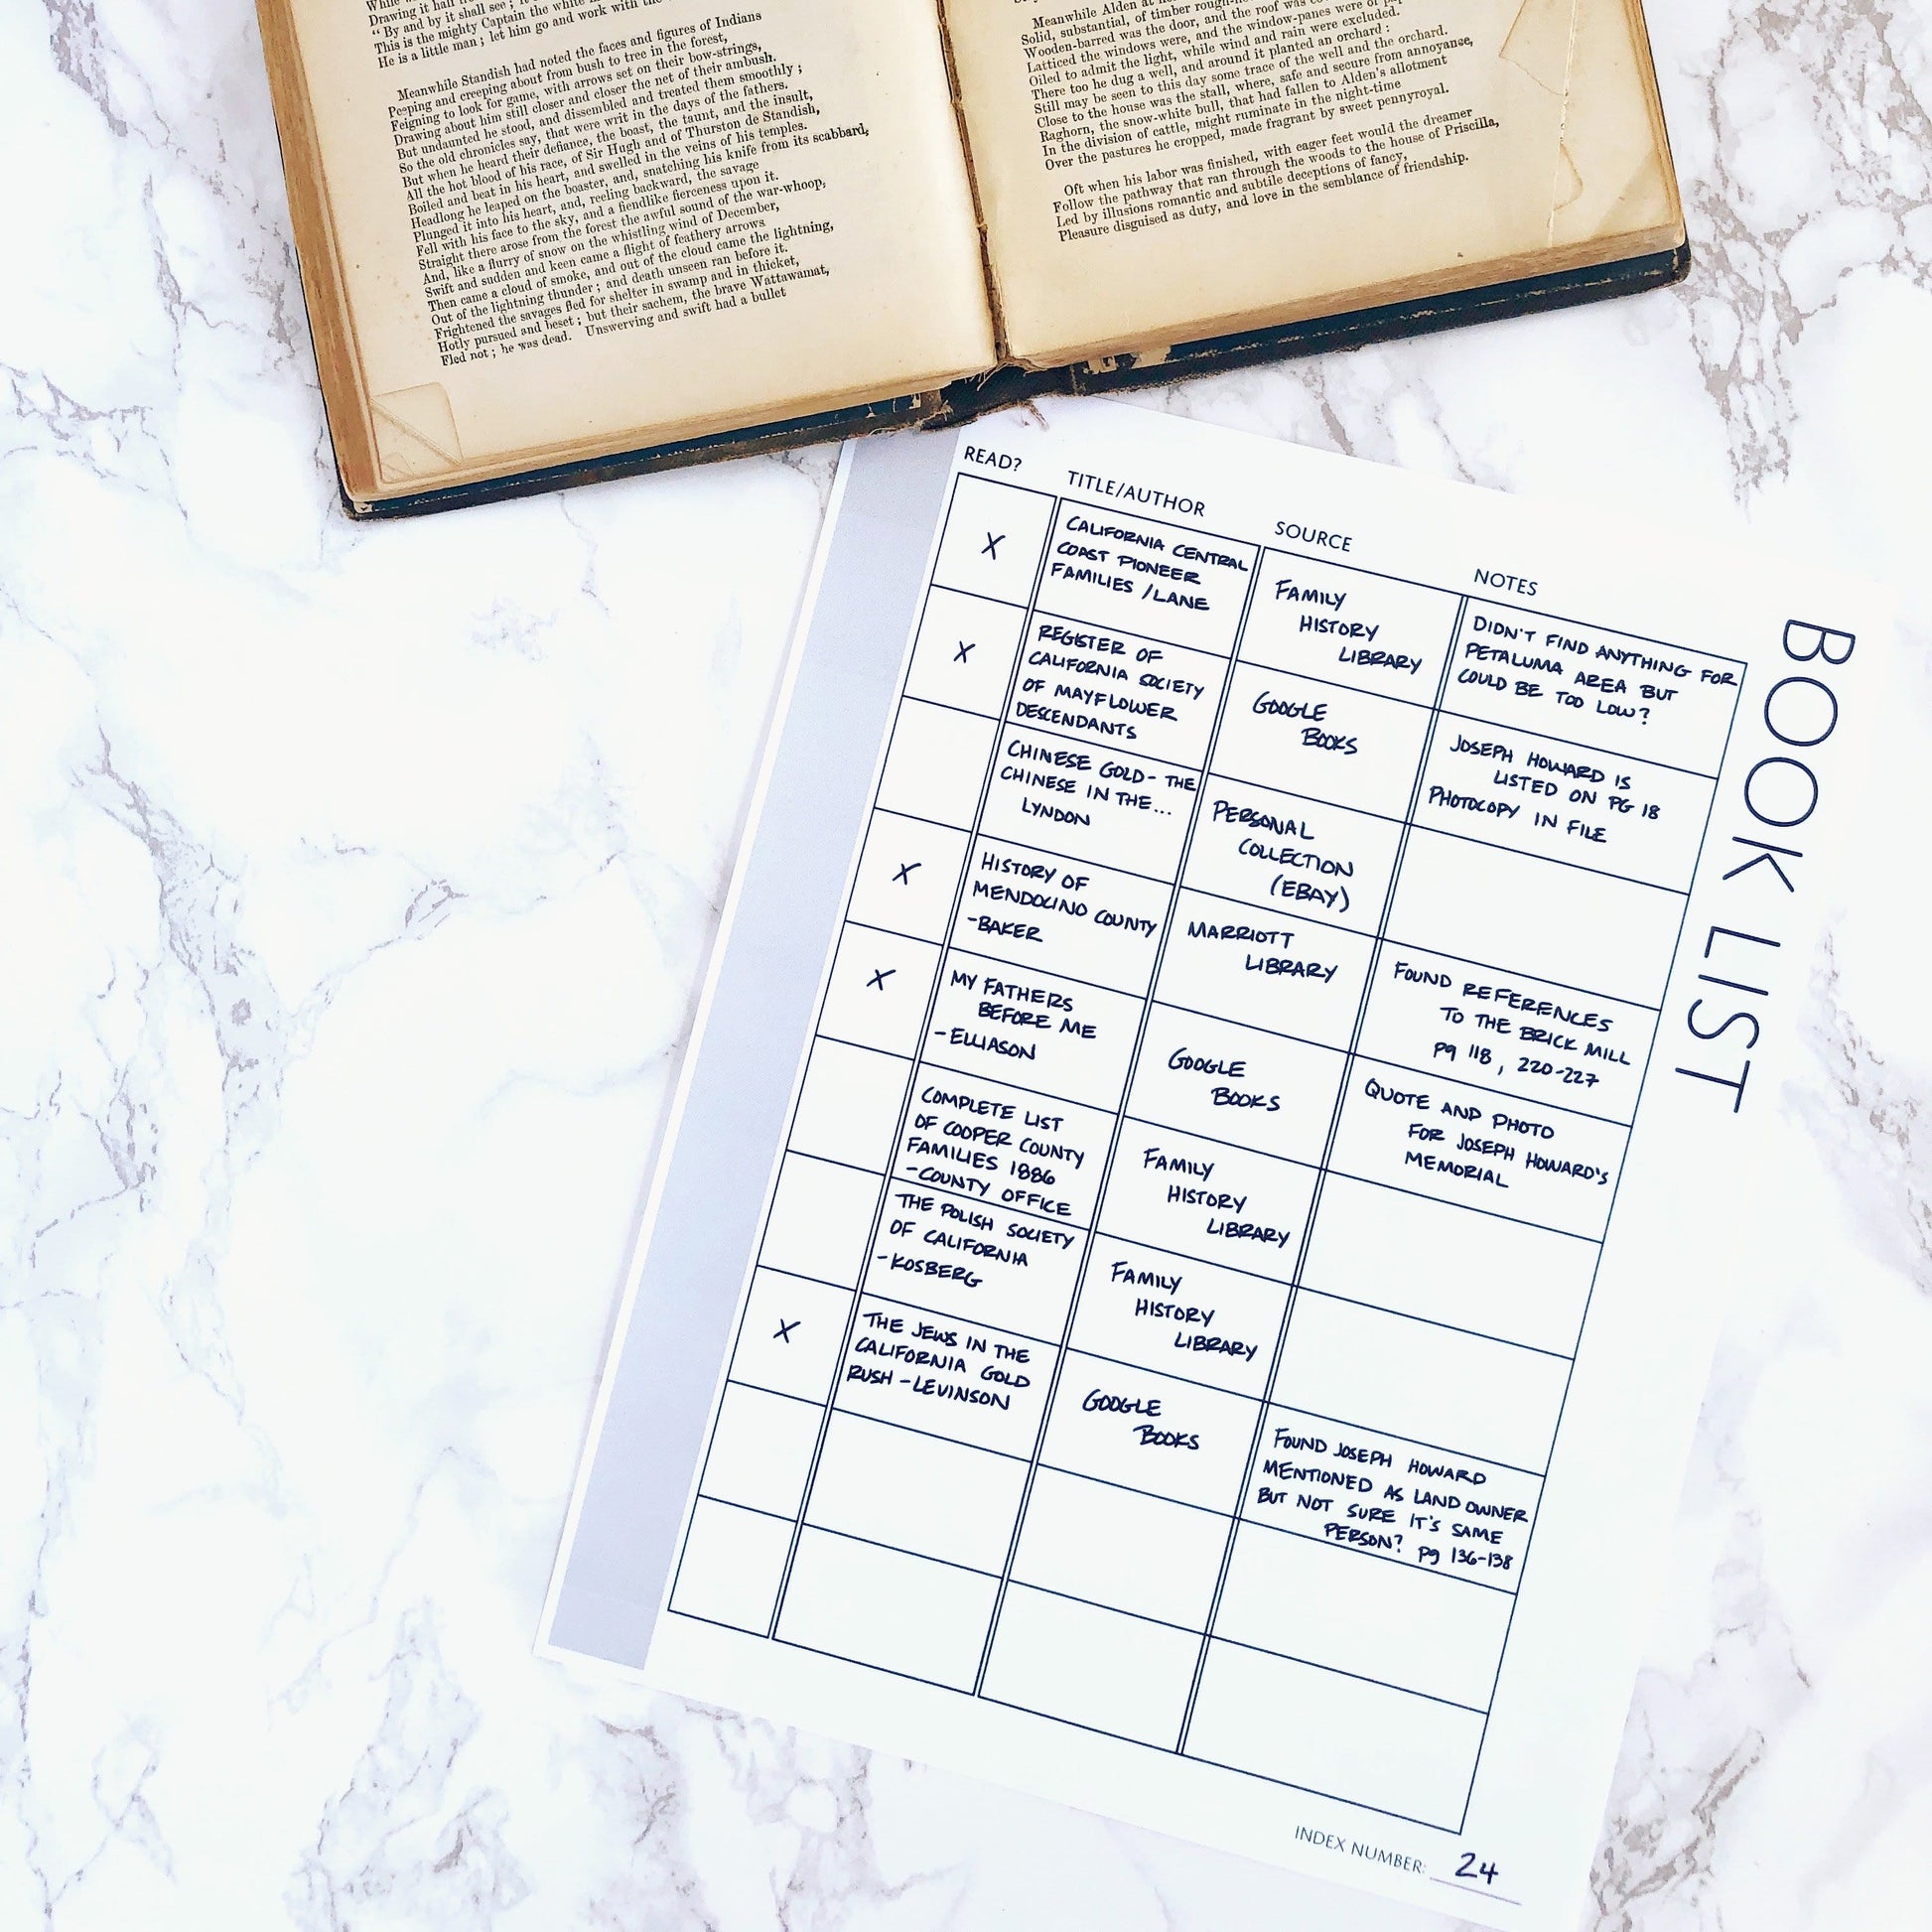 Book List: Printable Form for Genealogy Research Organization